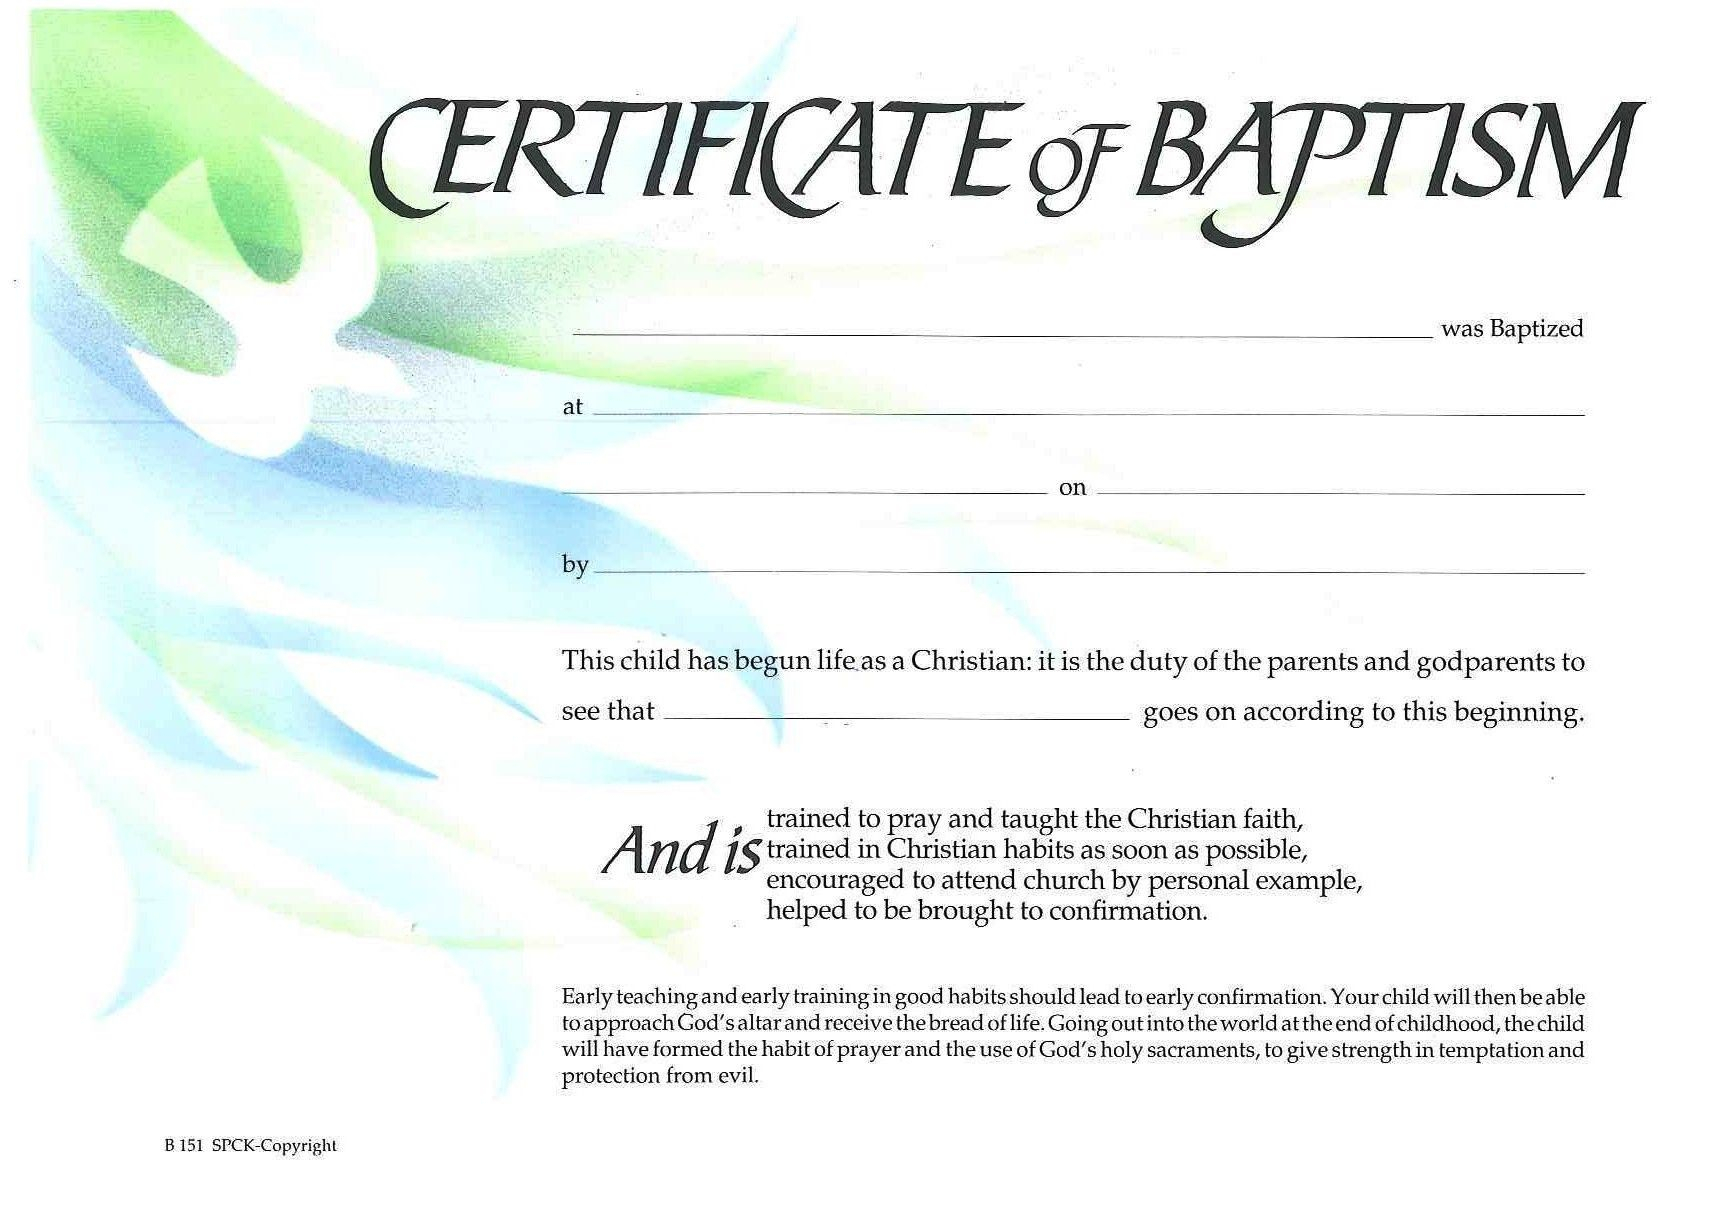 Baptism Certificate Xp4Eamuz | Certificate Templates, Baby Throughout Christian Baptism Certificate Template